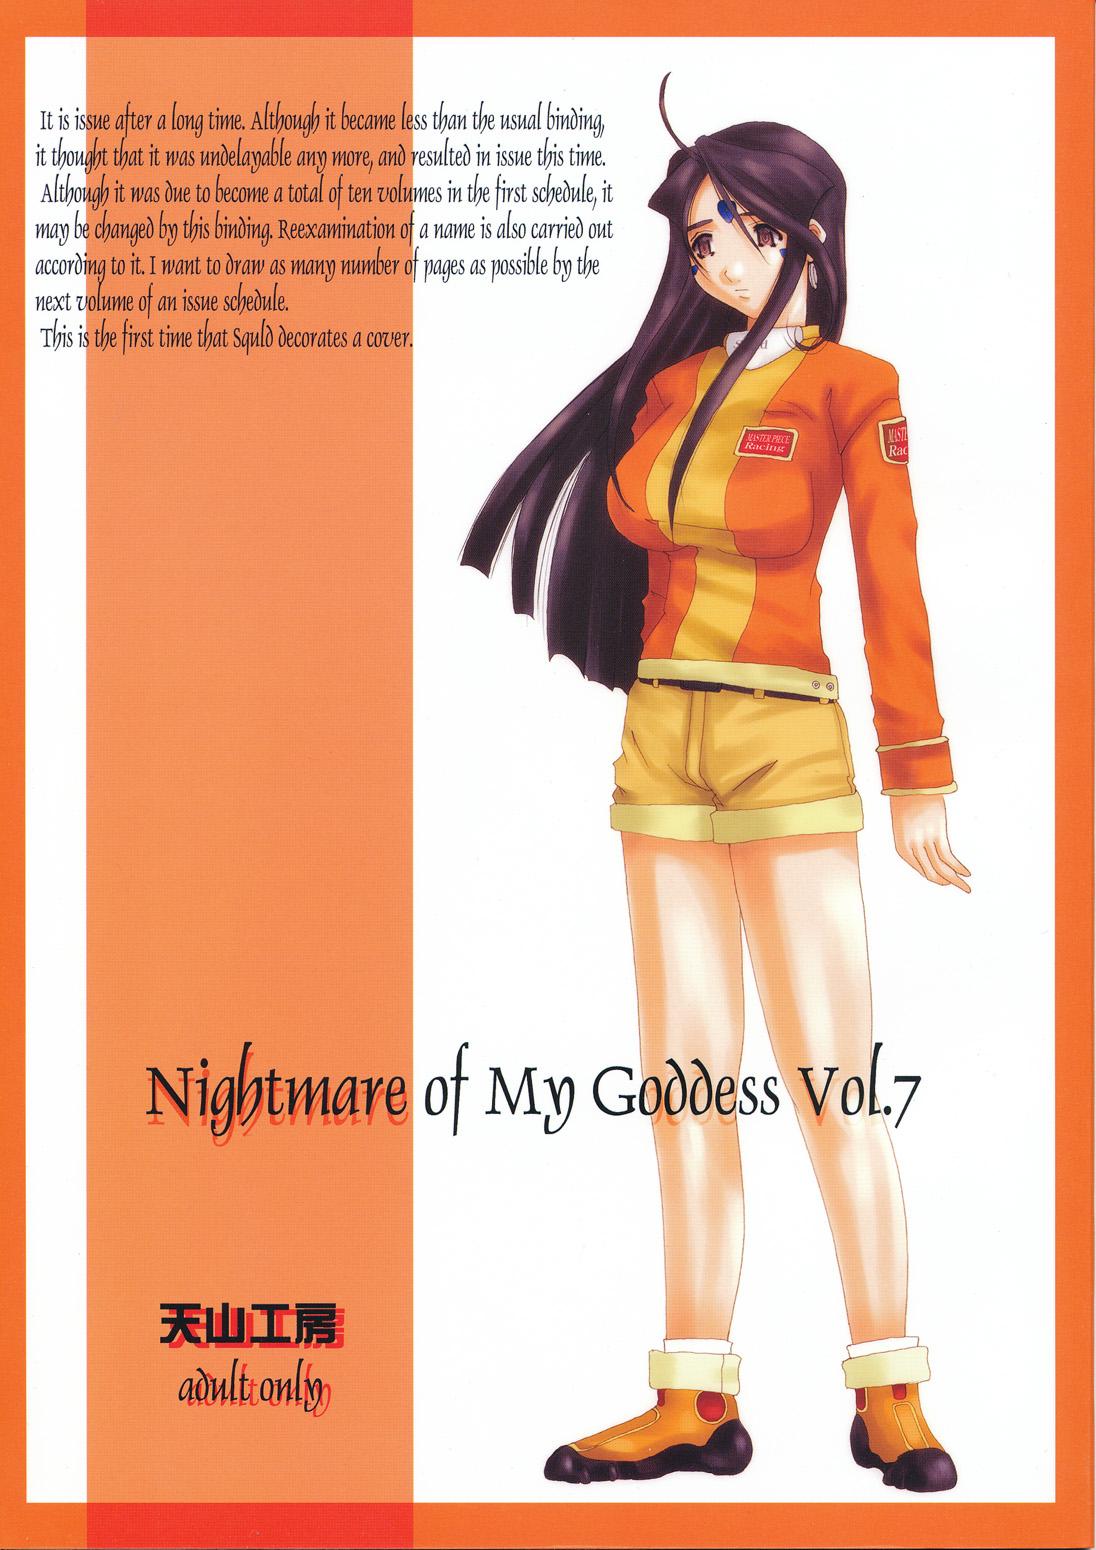 Blowjobs Nightmare of My Goddess Vol. 7 - Ah my goddess Awesome - Picture 1